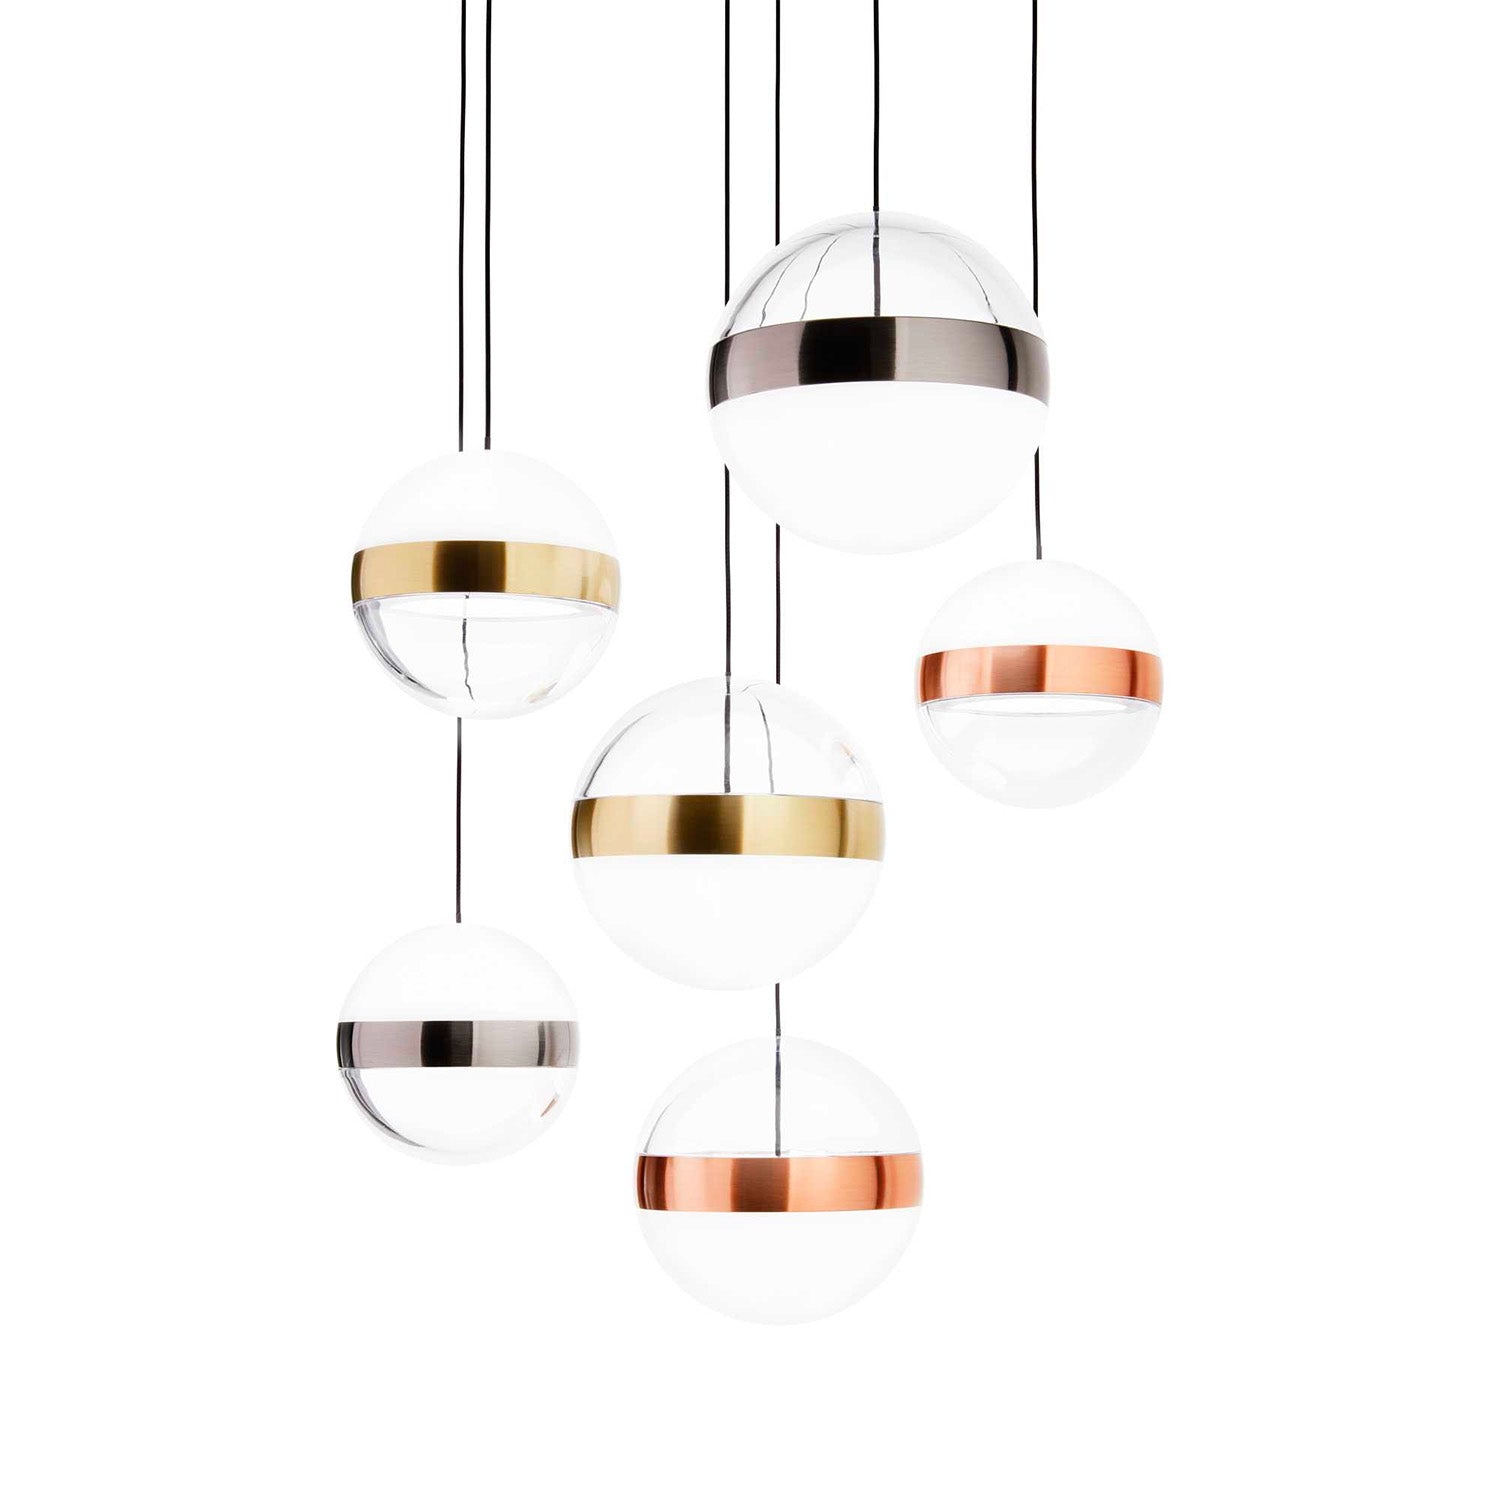 GALAXY - Glass globe pendant light with copper, brass and nickel